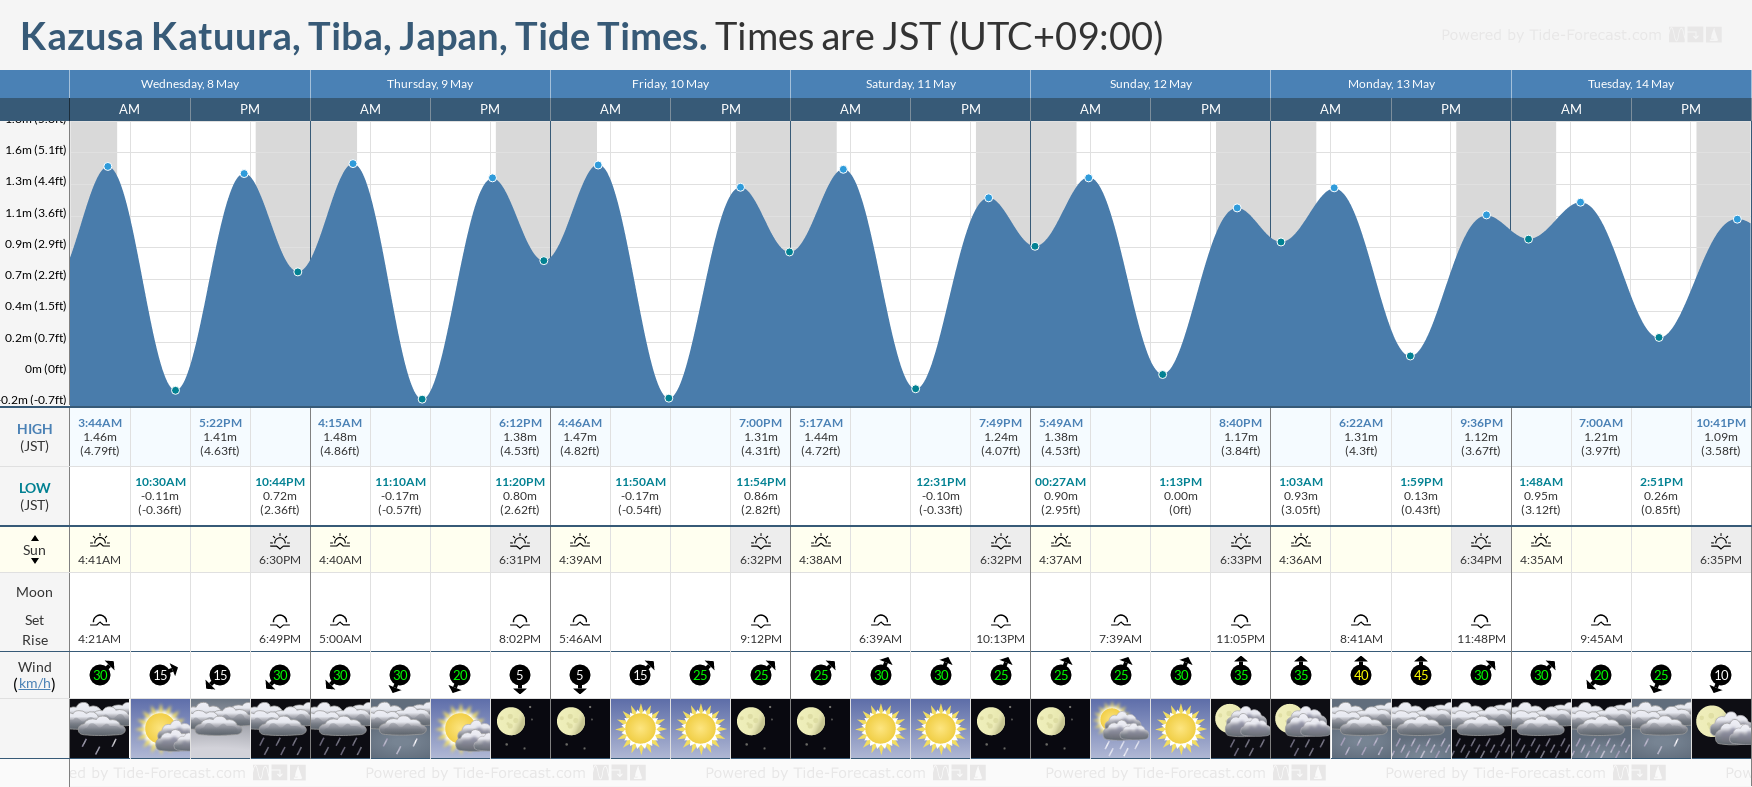 Kazusa Katuura, Tiba, Japan Tide Chart including high and low tide tide times for the next 7 days